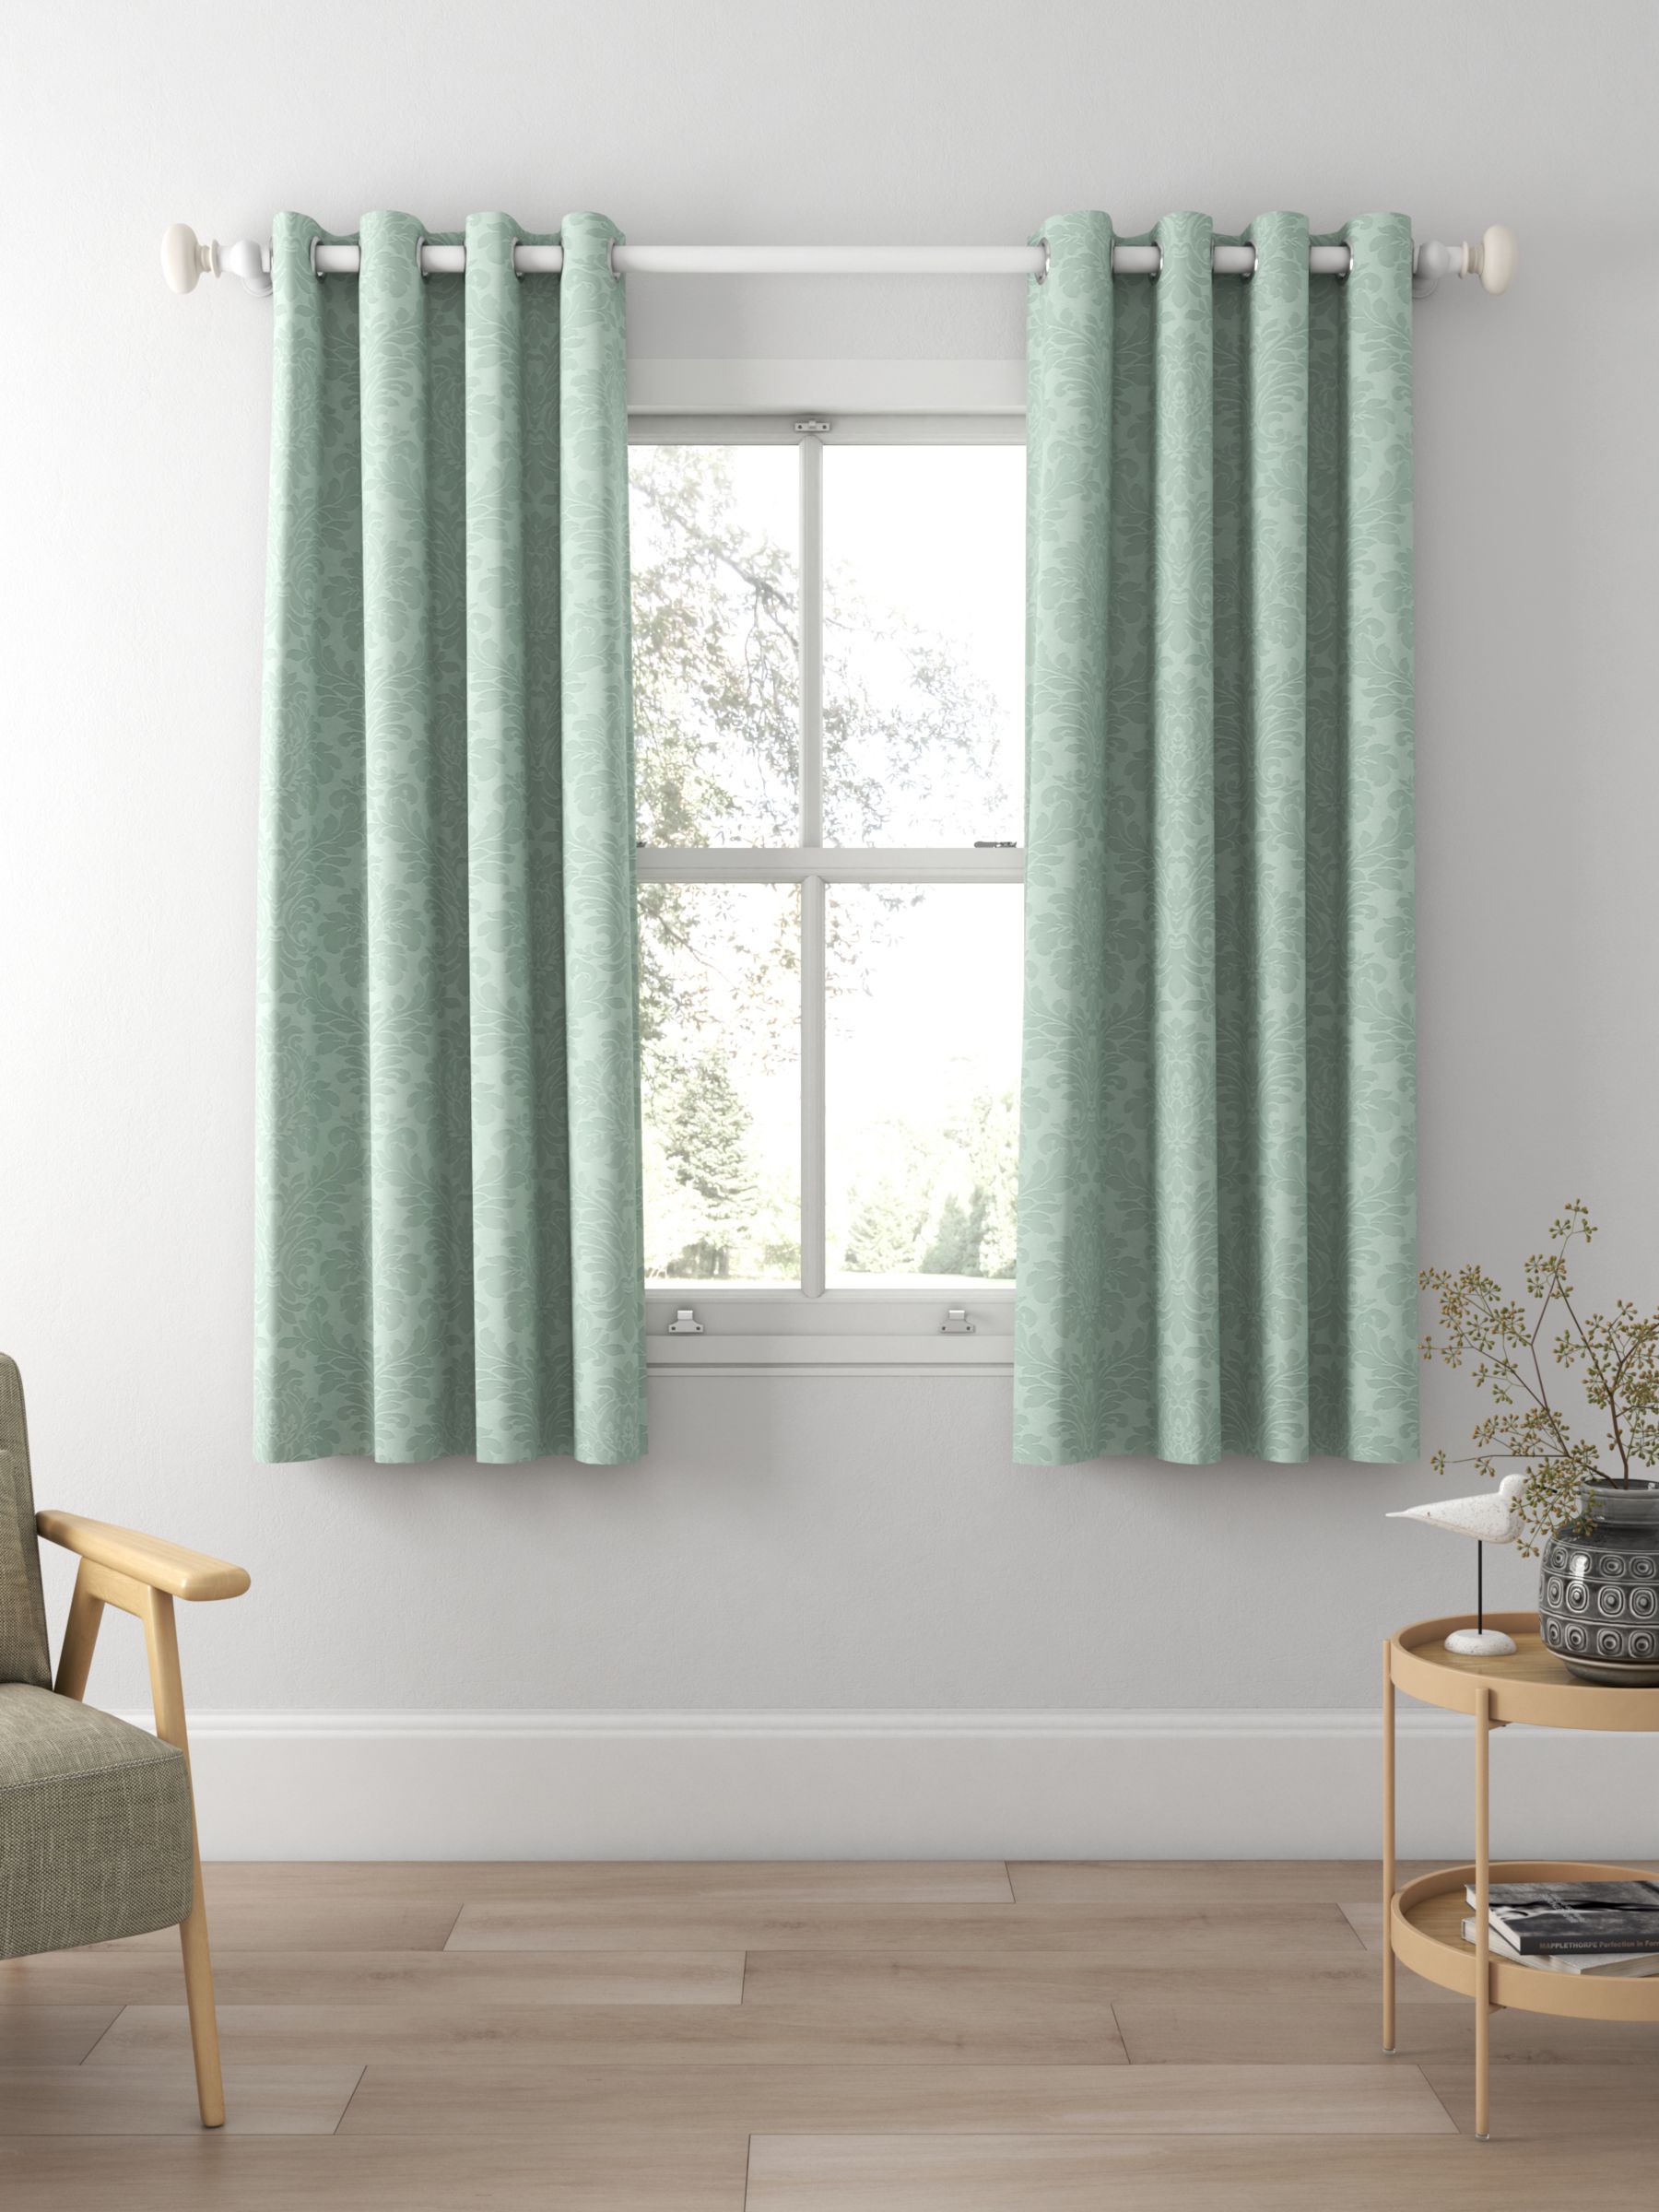 Sanderson Lymington Damask Made to Measure Curtains or Roman Blind ...